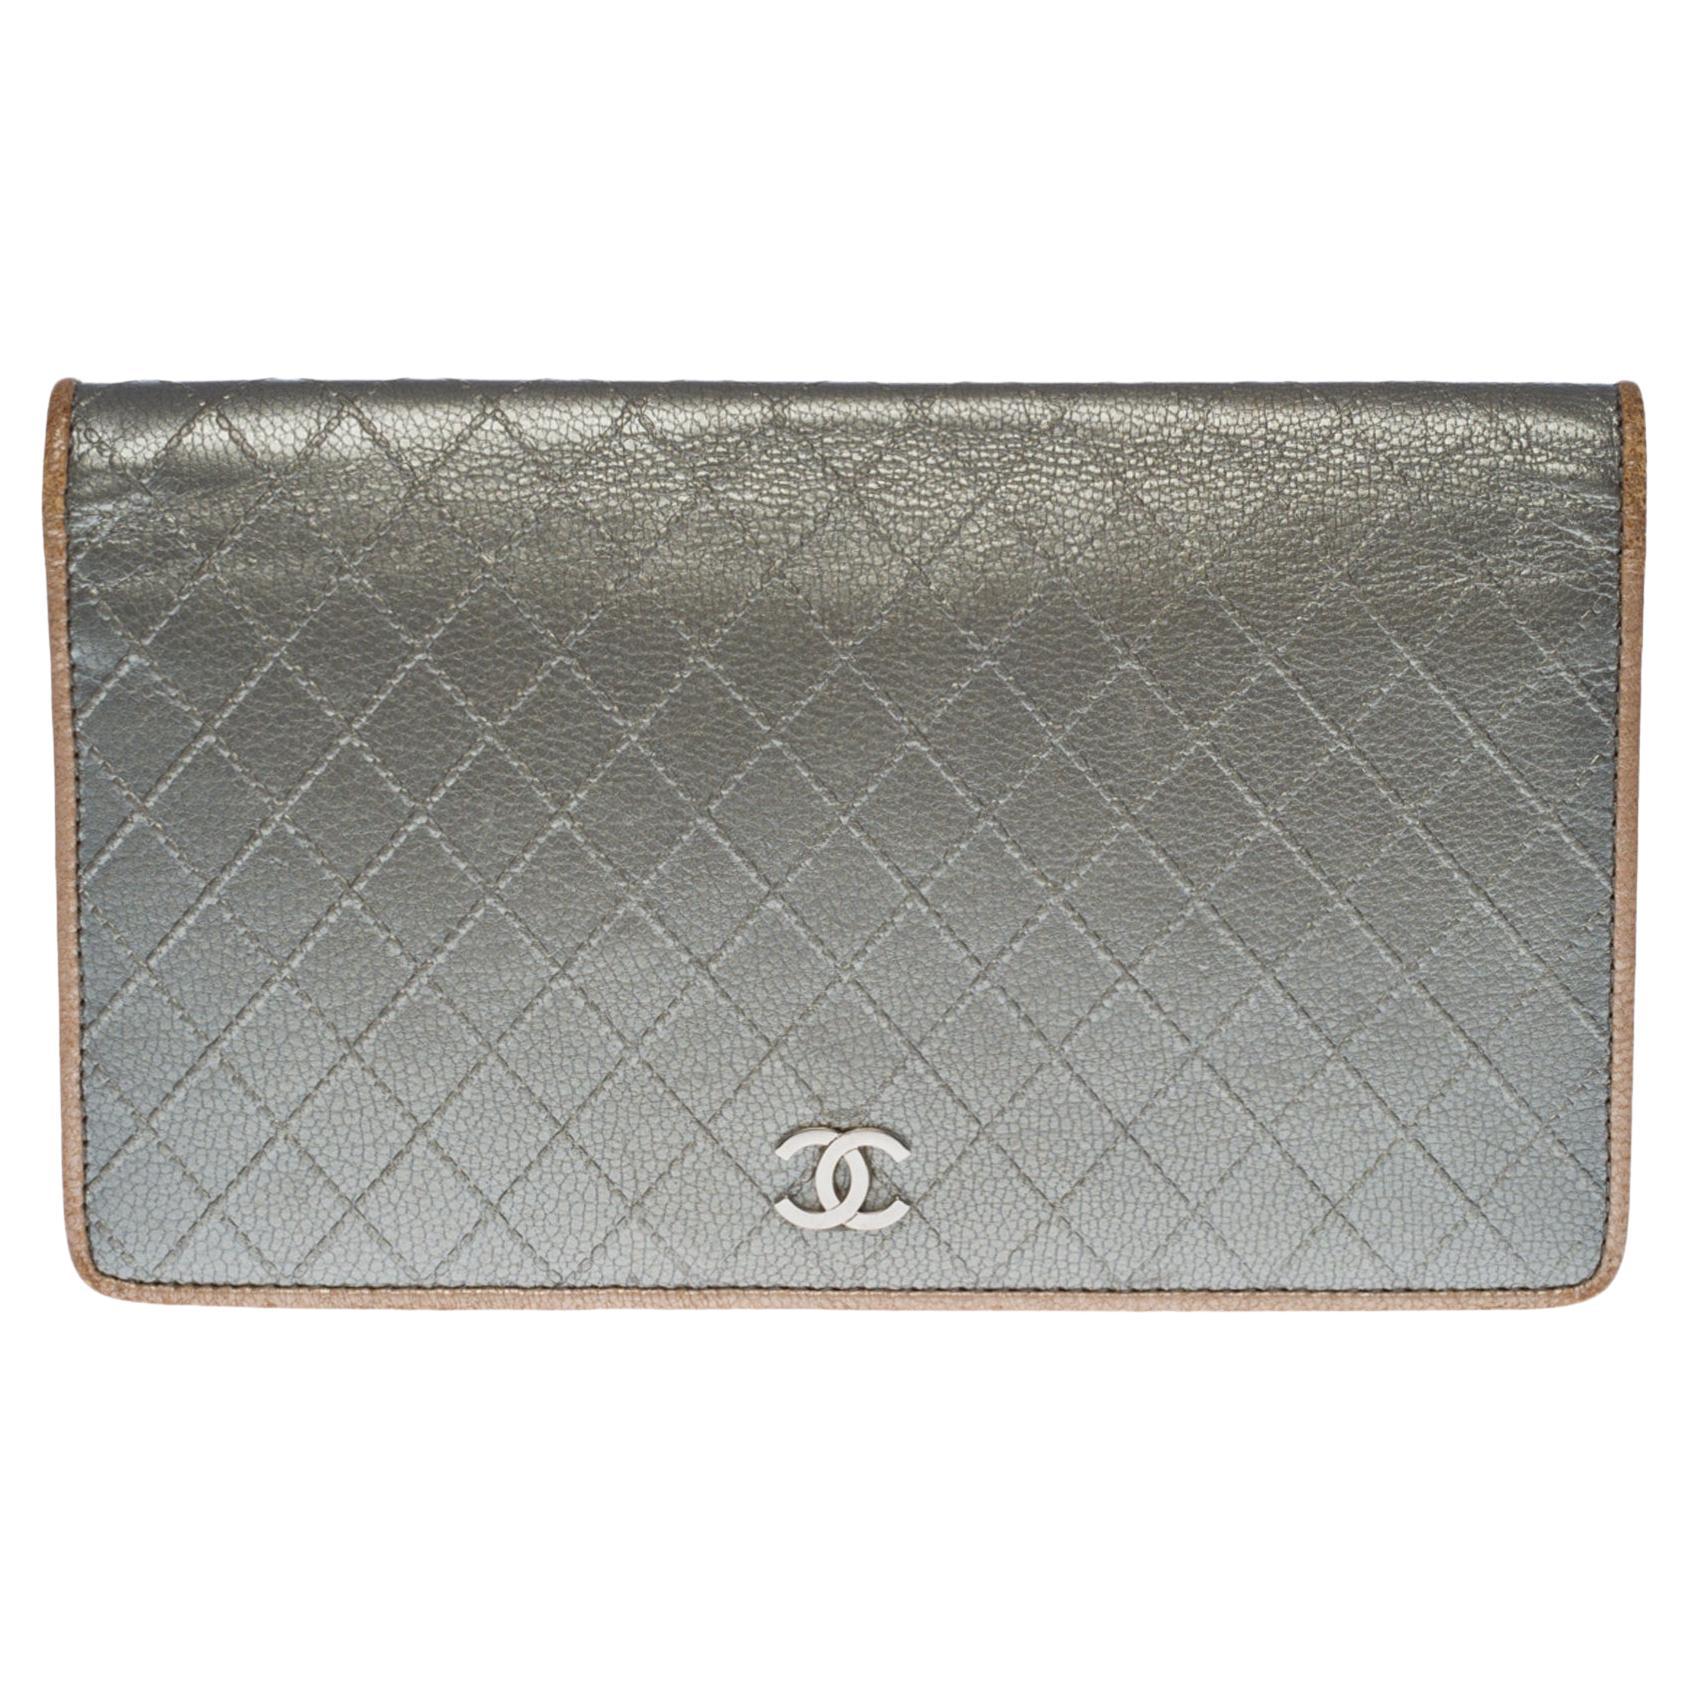 Chanel Flap Wallet in Metallic Silver lambskin leather and Gold-tone interior